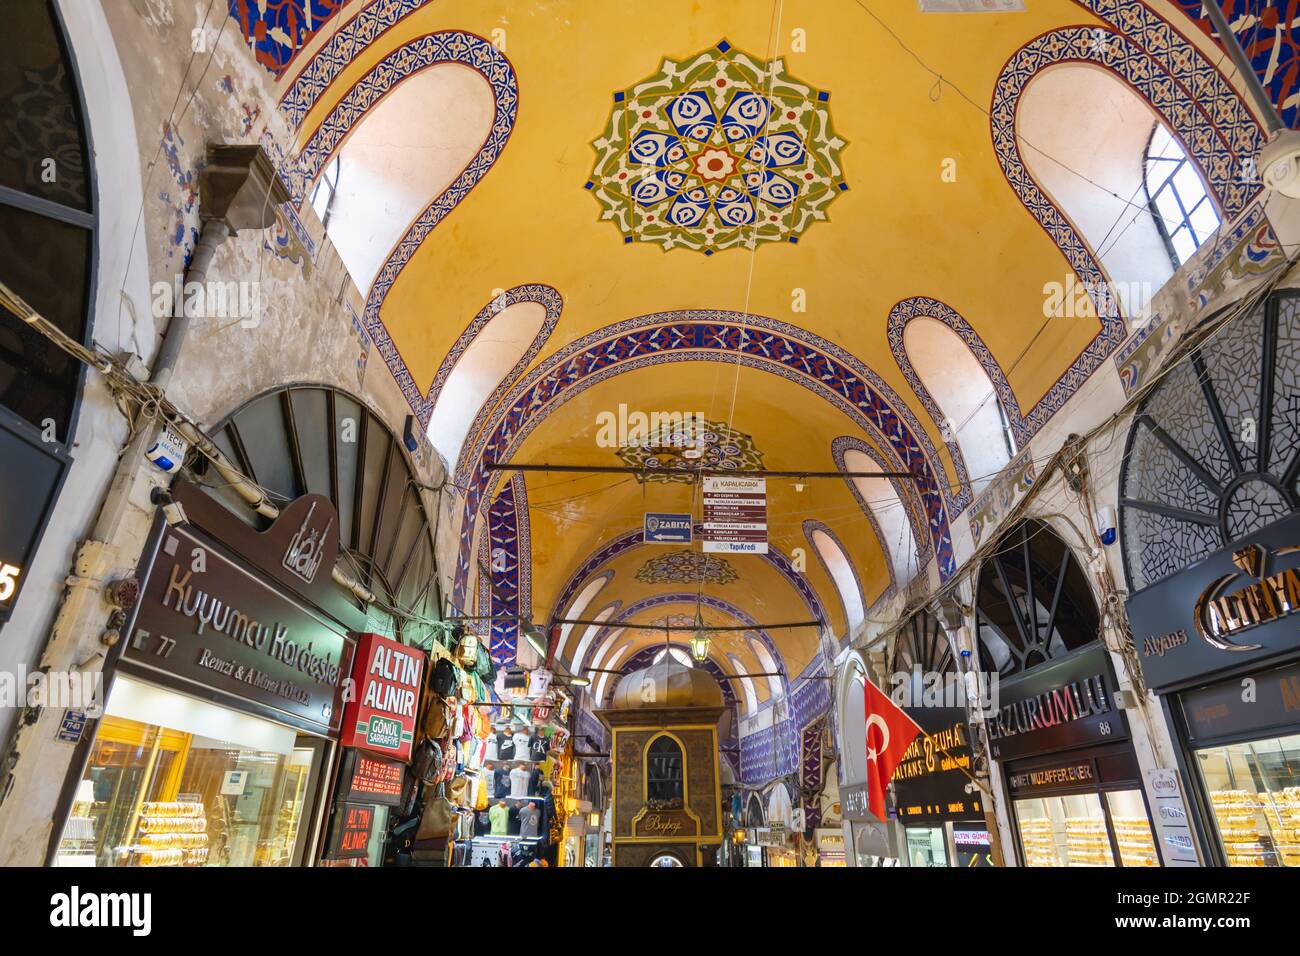 Istanbul, Turkey - September 2021: The Grand Bazaar in Istanbul, one of the largest and oldest covered markets in the world and popular tourist sights Stock Photo